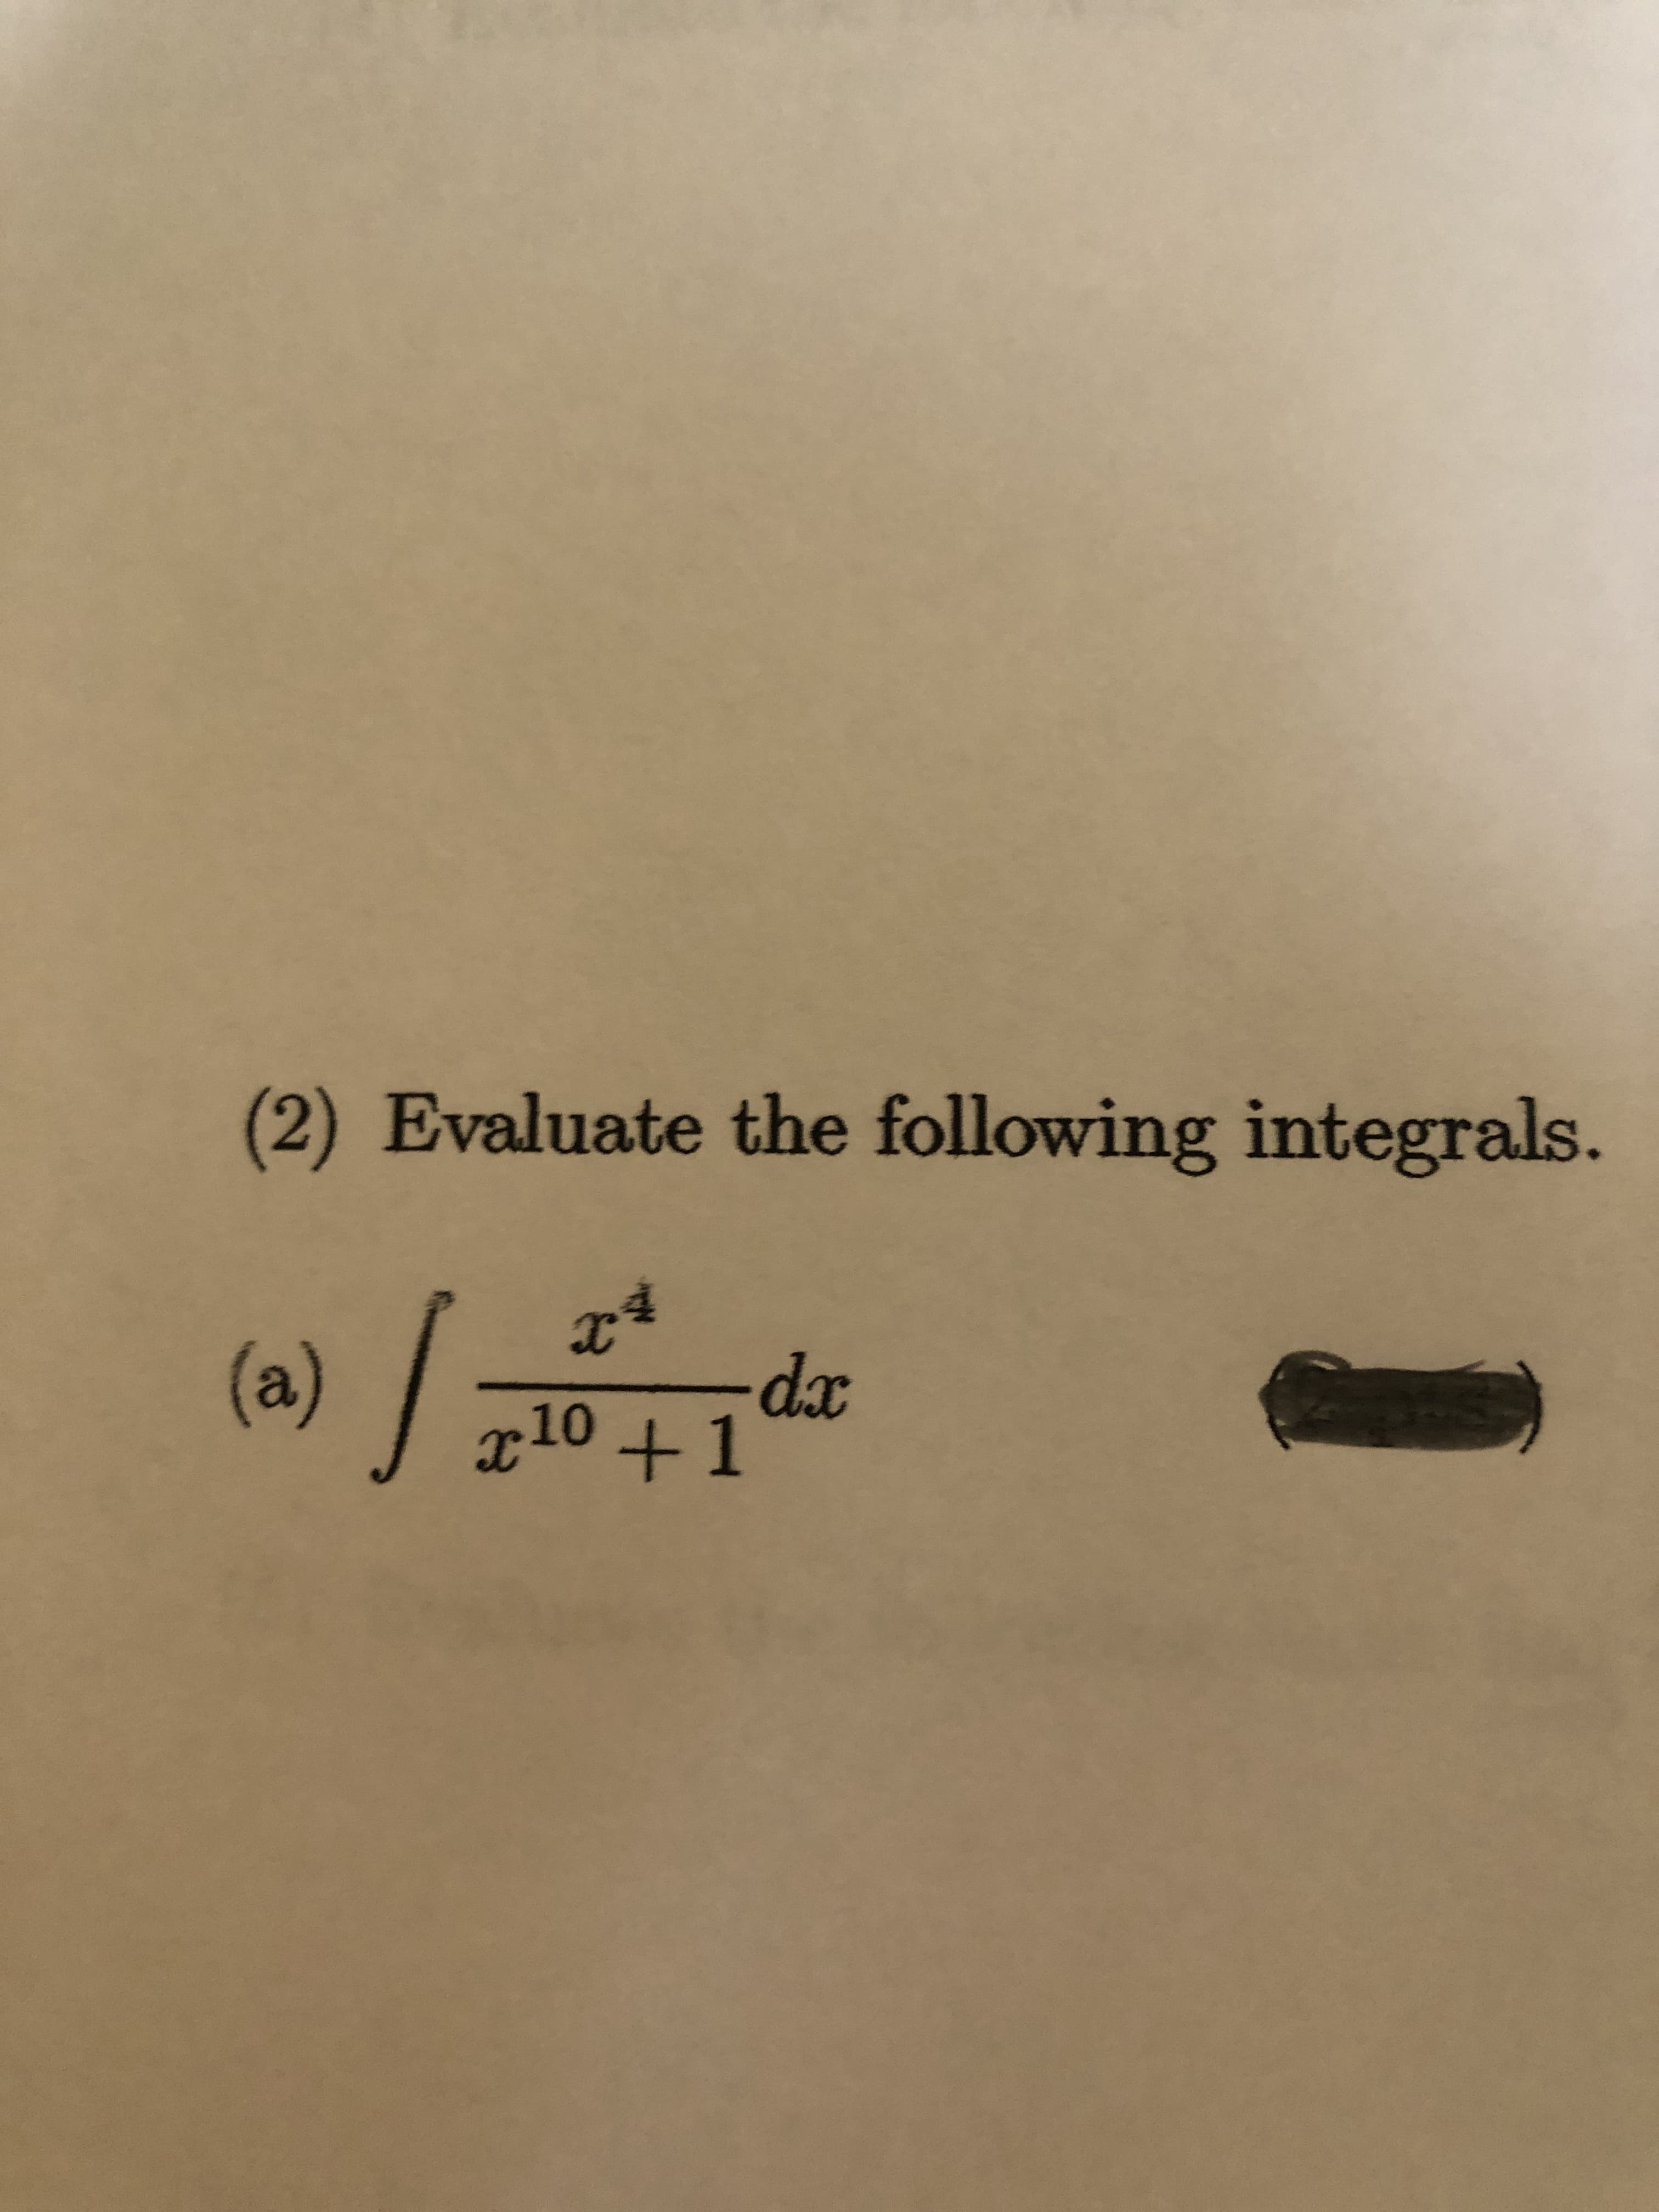 (2) Evaluate the following integrals.
